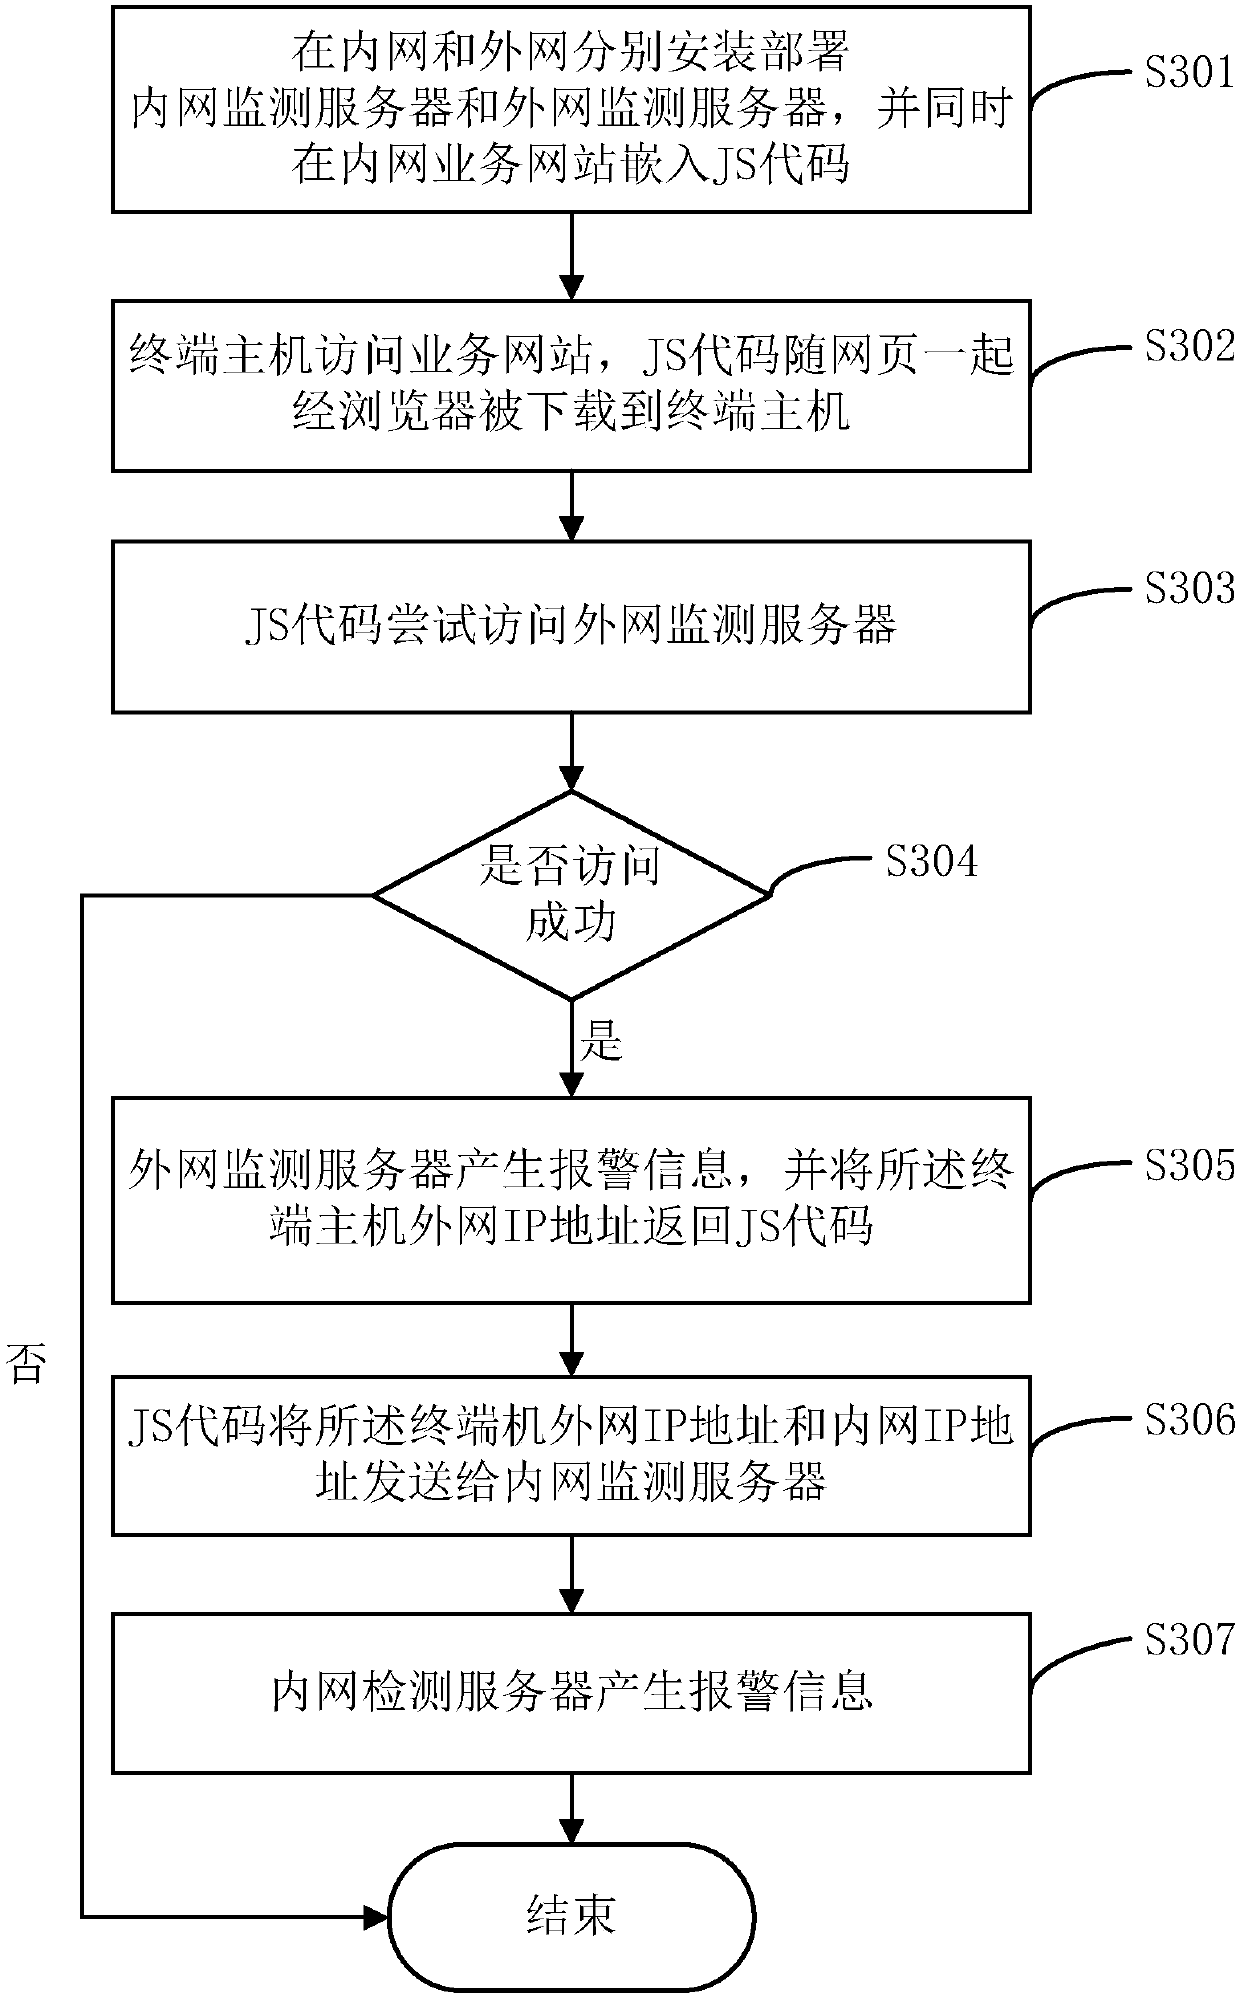 Agent-free illegal external-connection monitoring method and system